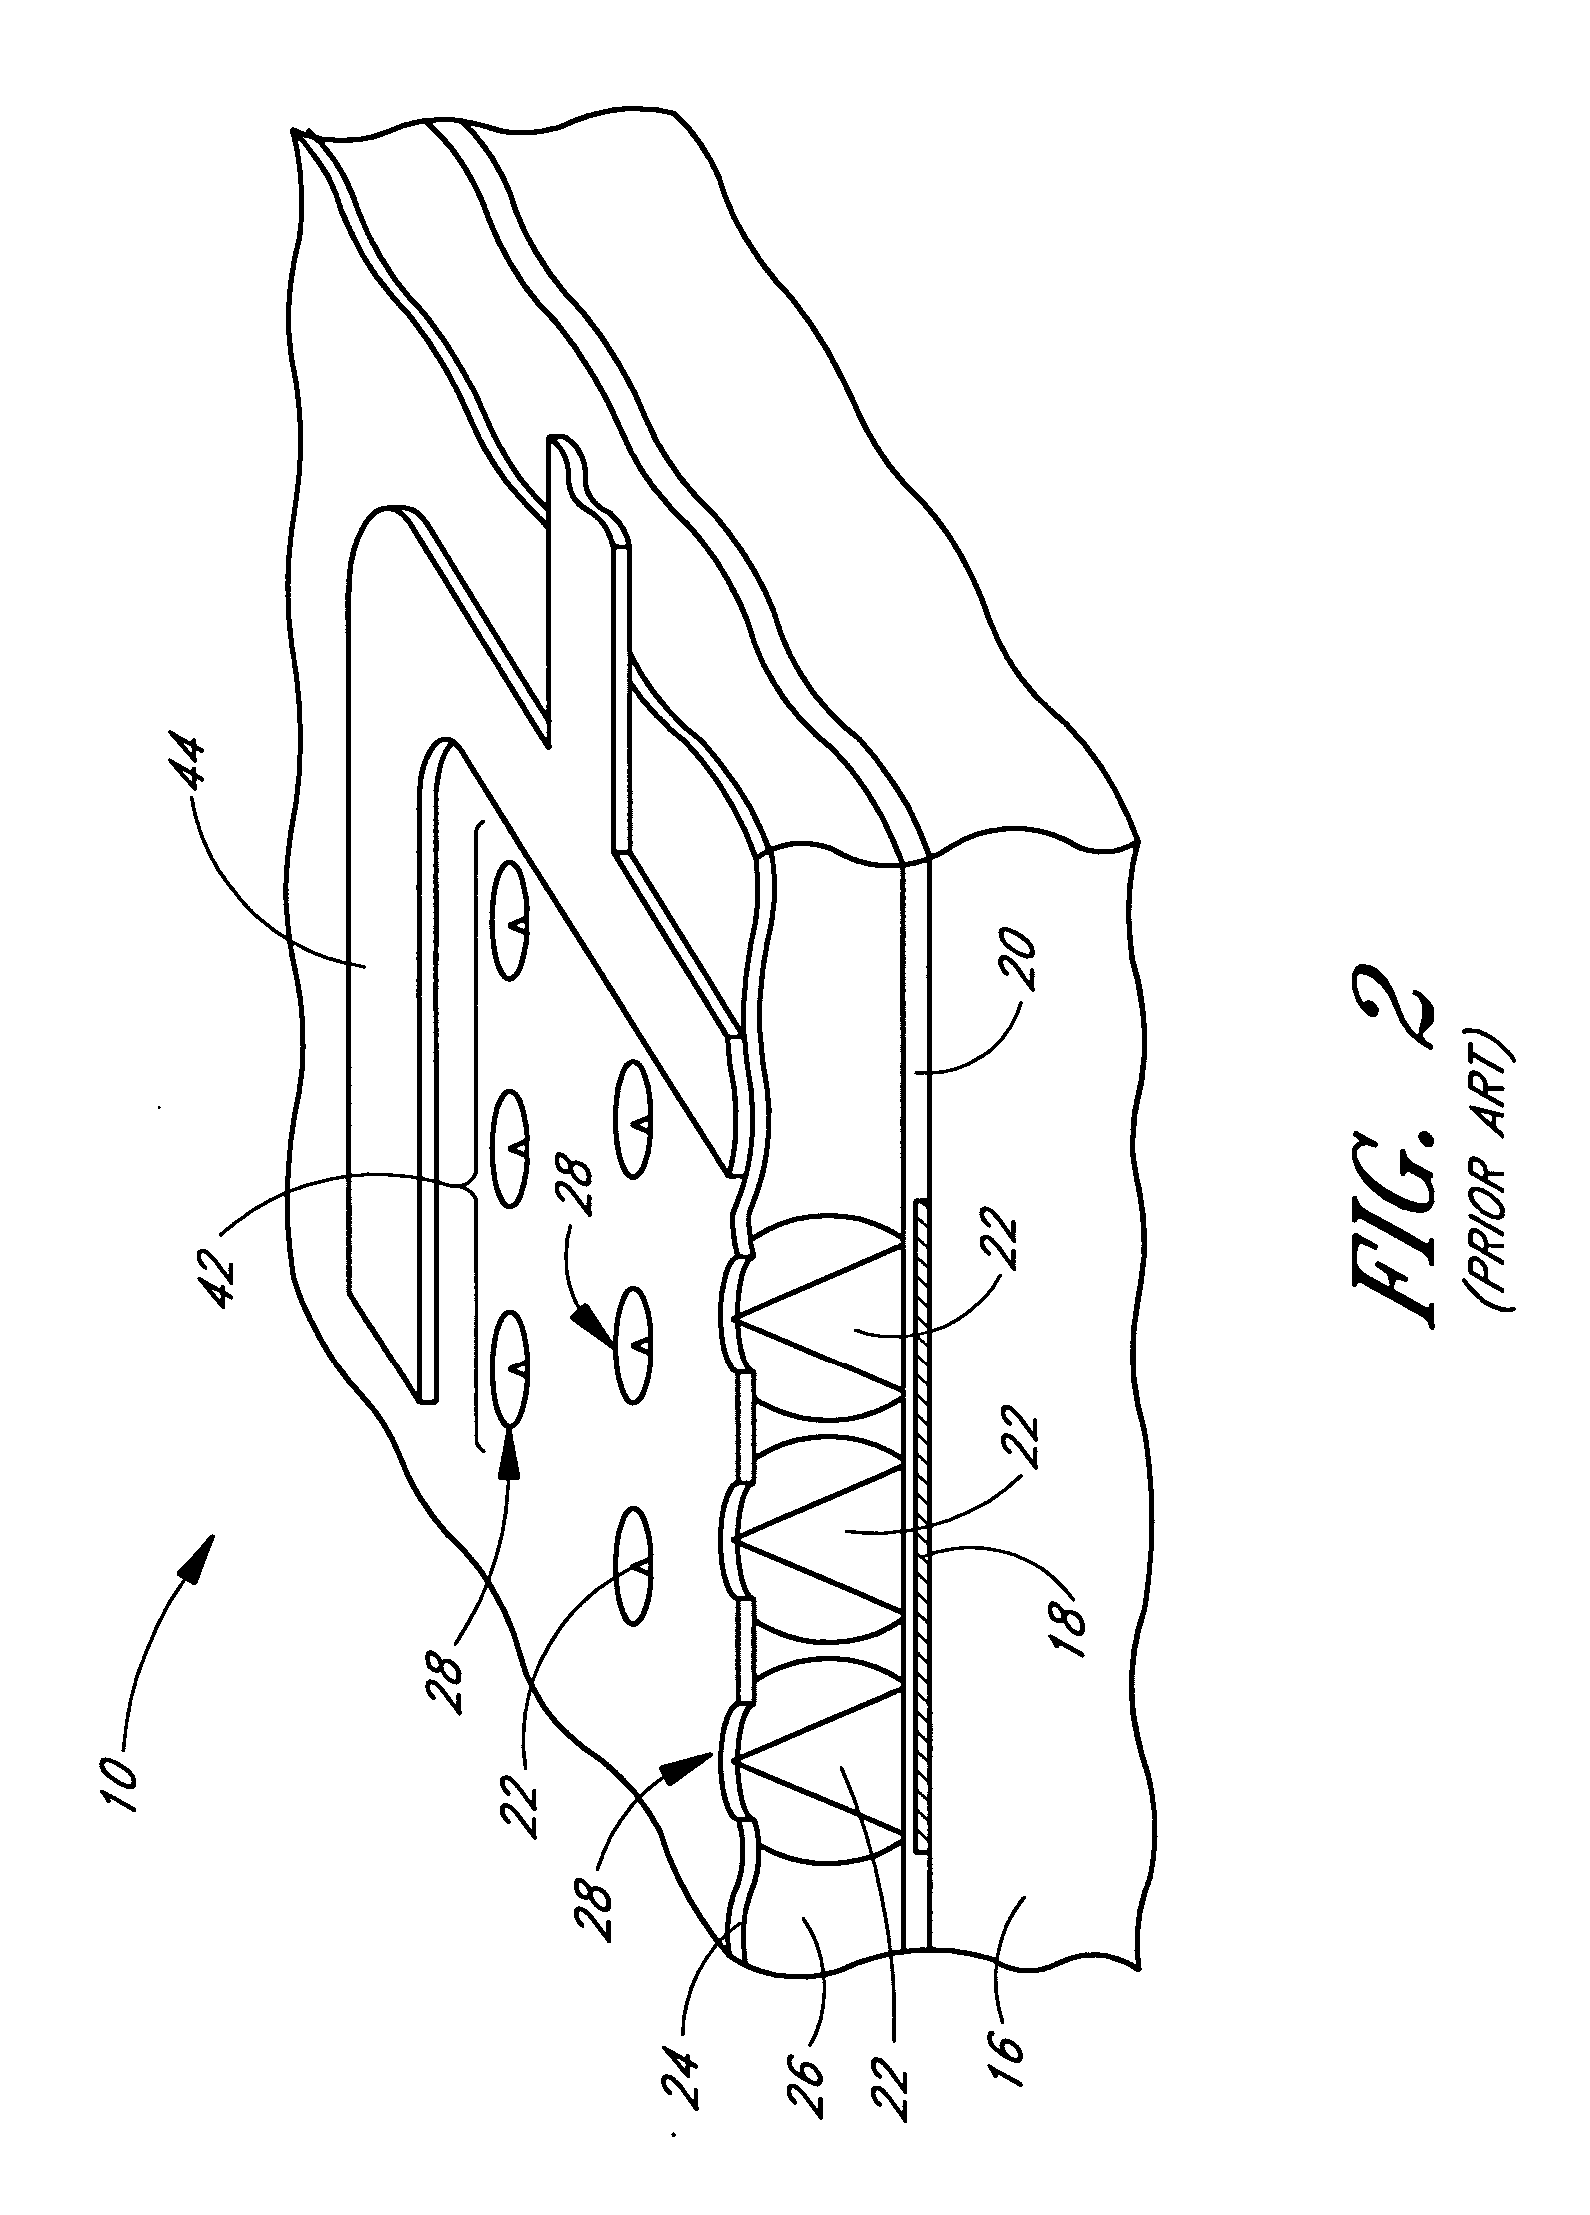 Method of forming nitrogen and phosphorus doped amorphous silicon as resistor for field emission display device baseplate